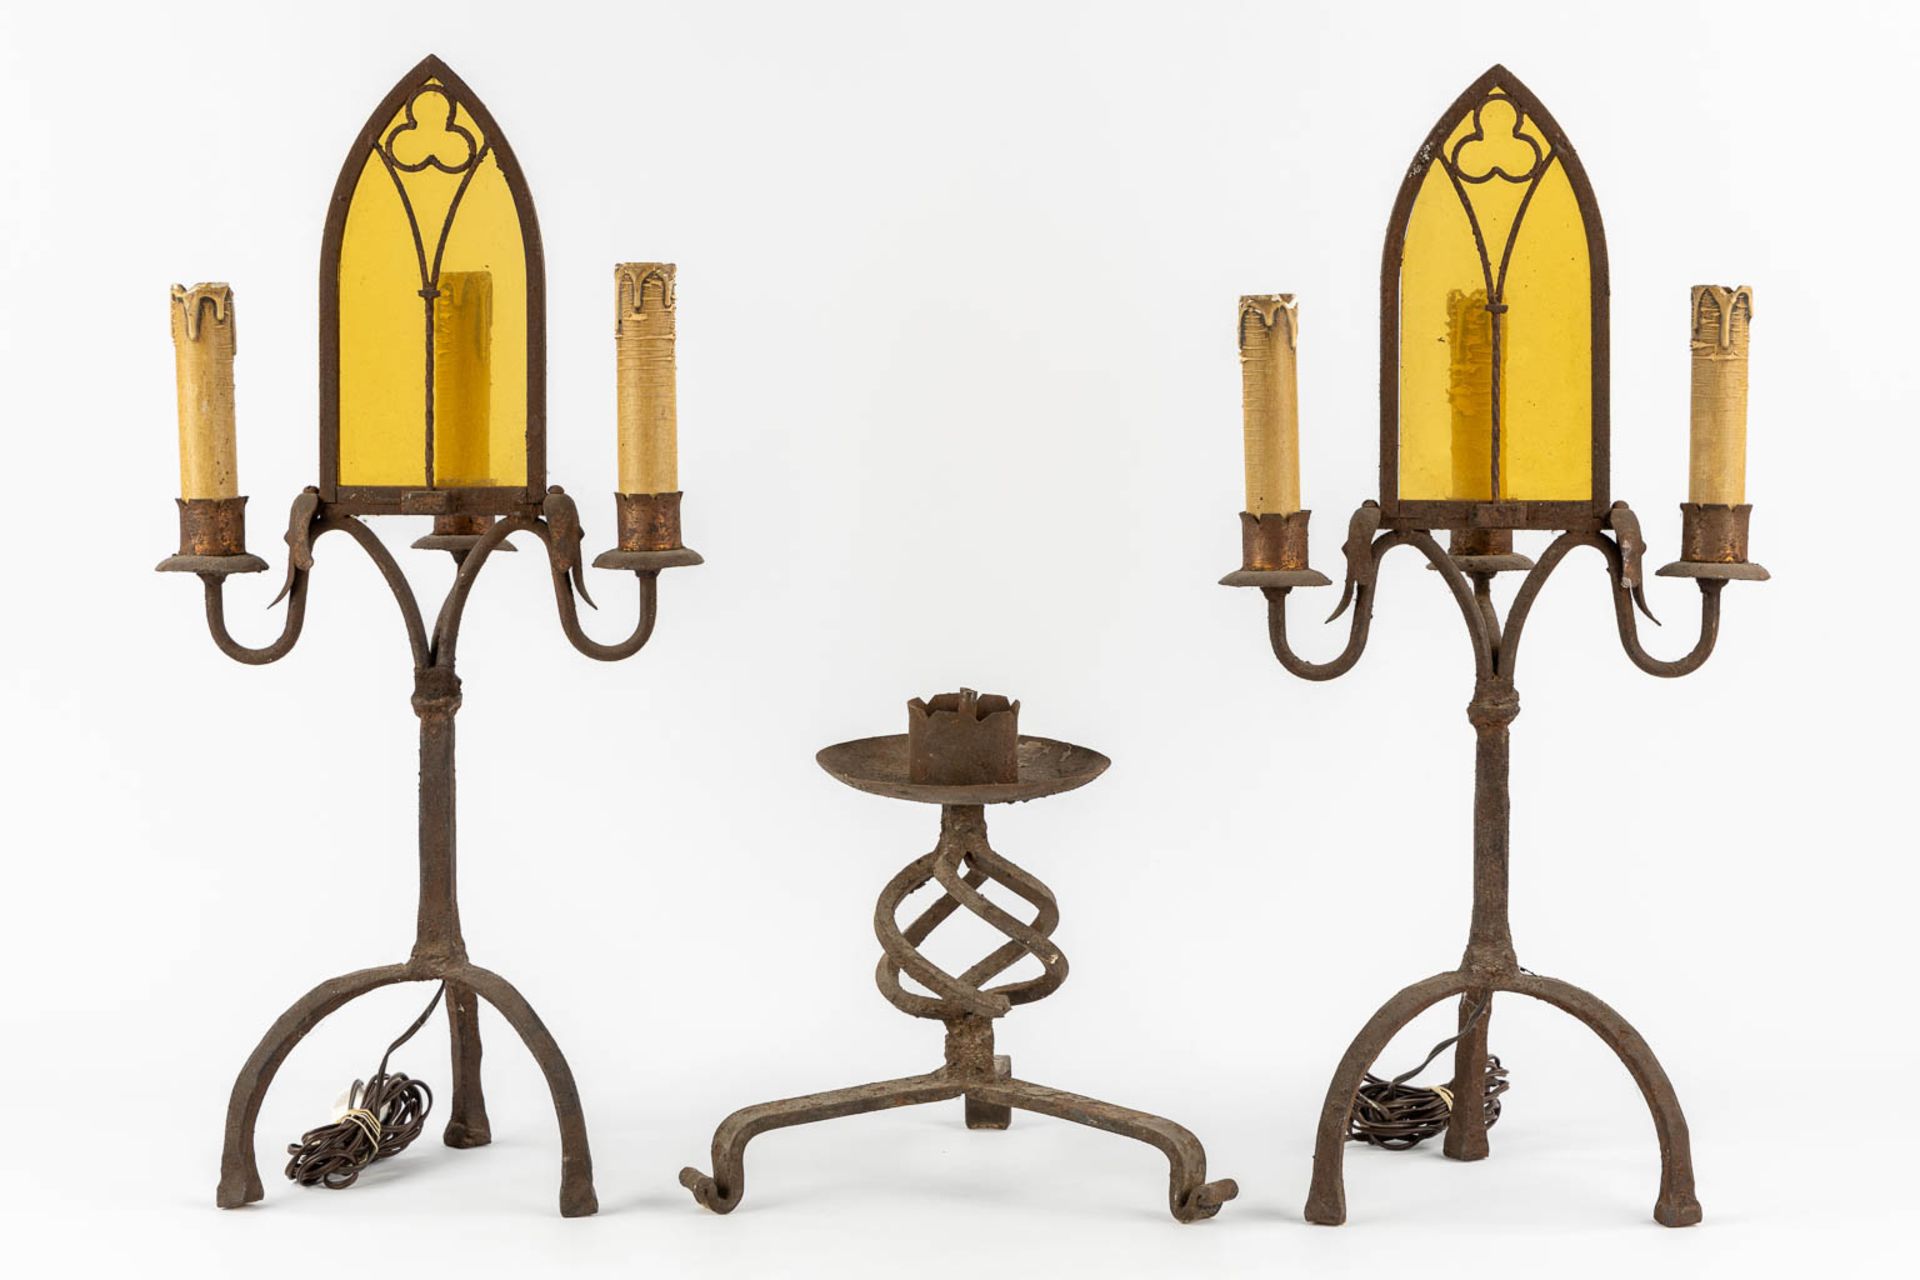 A pair of wrought iron table lamps in a Gothic Revival style. Added a candlestick. (H:63 cm) - Image 3 of 9